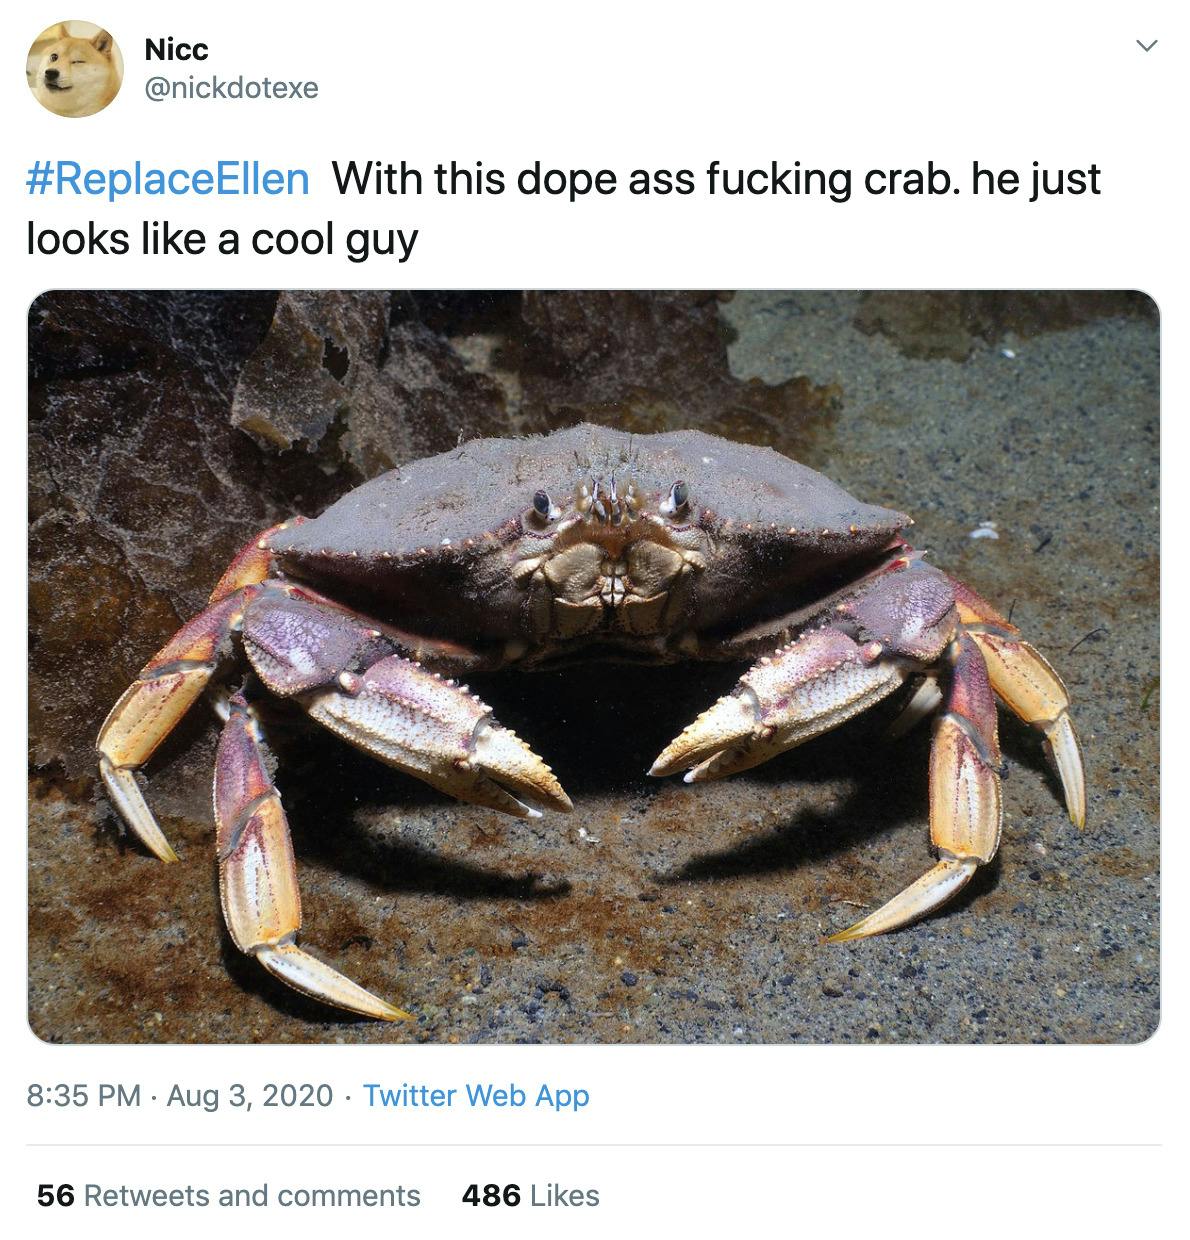 "#ReplaceEllen  With this dope ass fucking crab. he just looks like a cool guy" image of crab